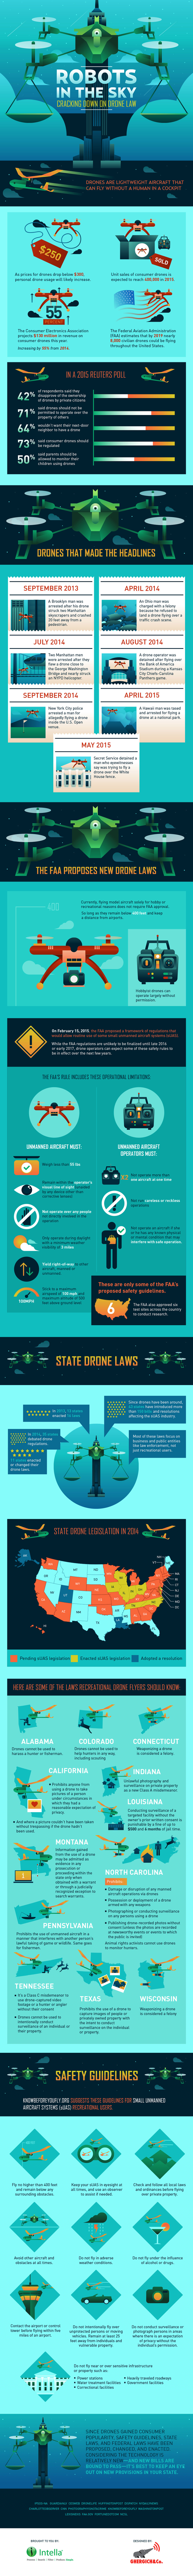 Robots in the Sky: Cracking Down on Drone Law